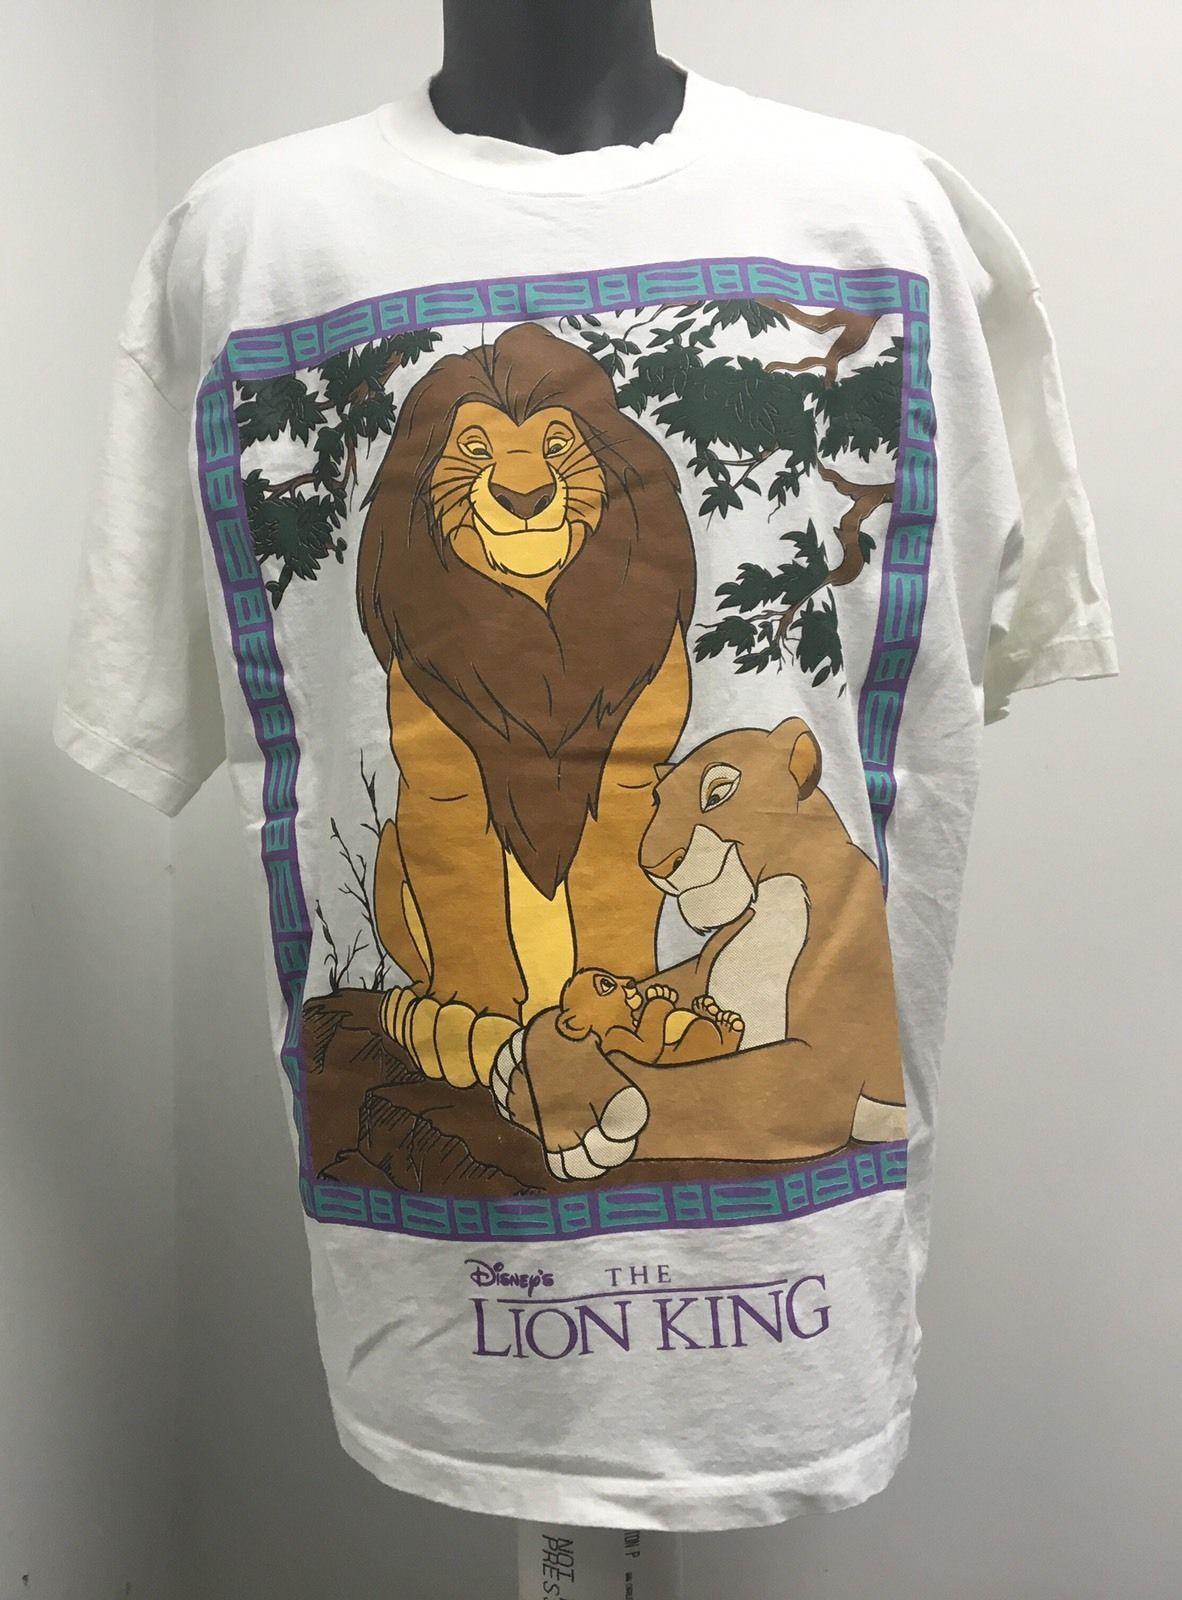 From 90 S Clothing and Apparel Logo - VINTAGE DISNEY The LION KING SHIRT 90s SIMBA RARE WHITE Logo Scar in ...